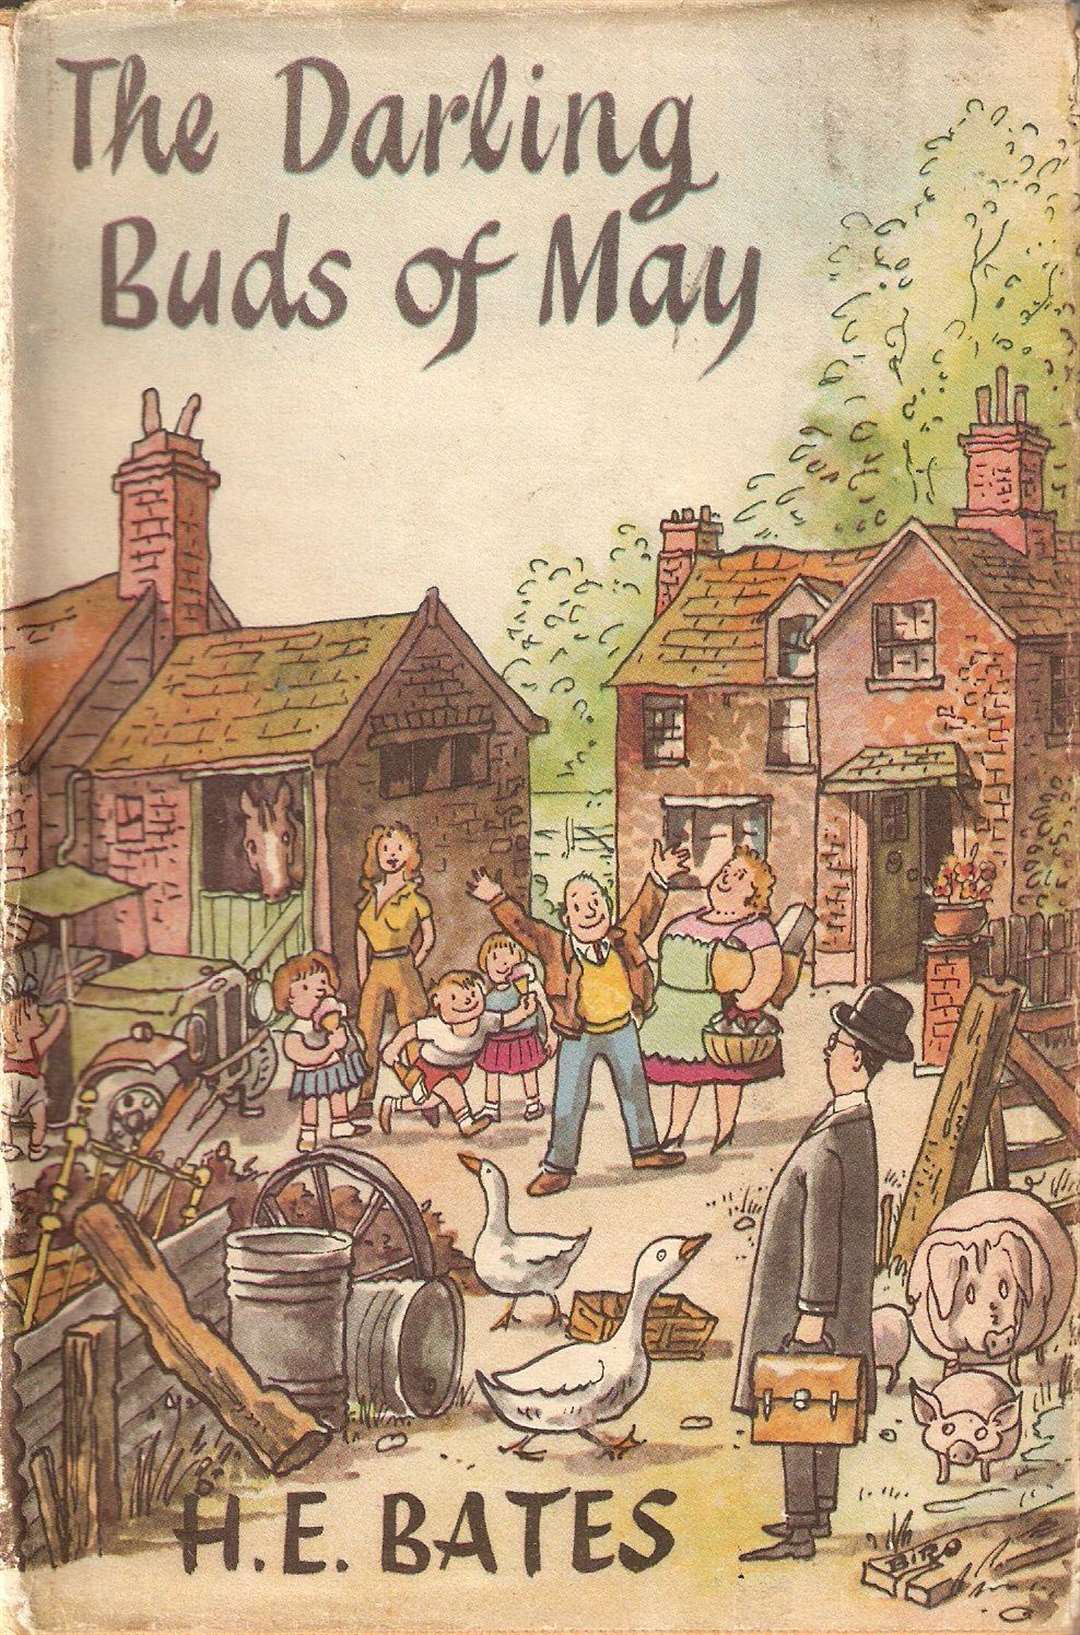 Darling Buds of May by HE Bates